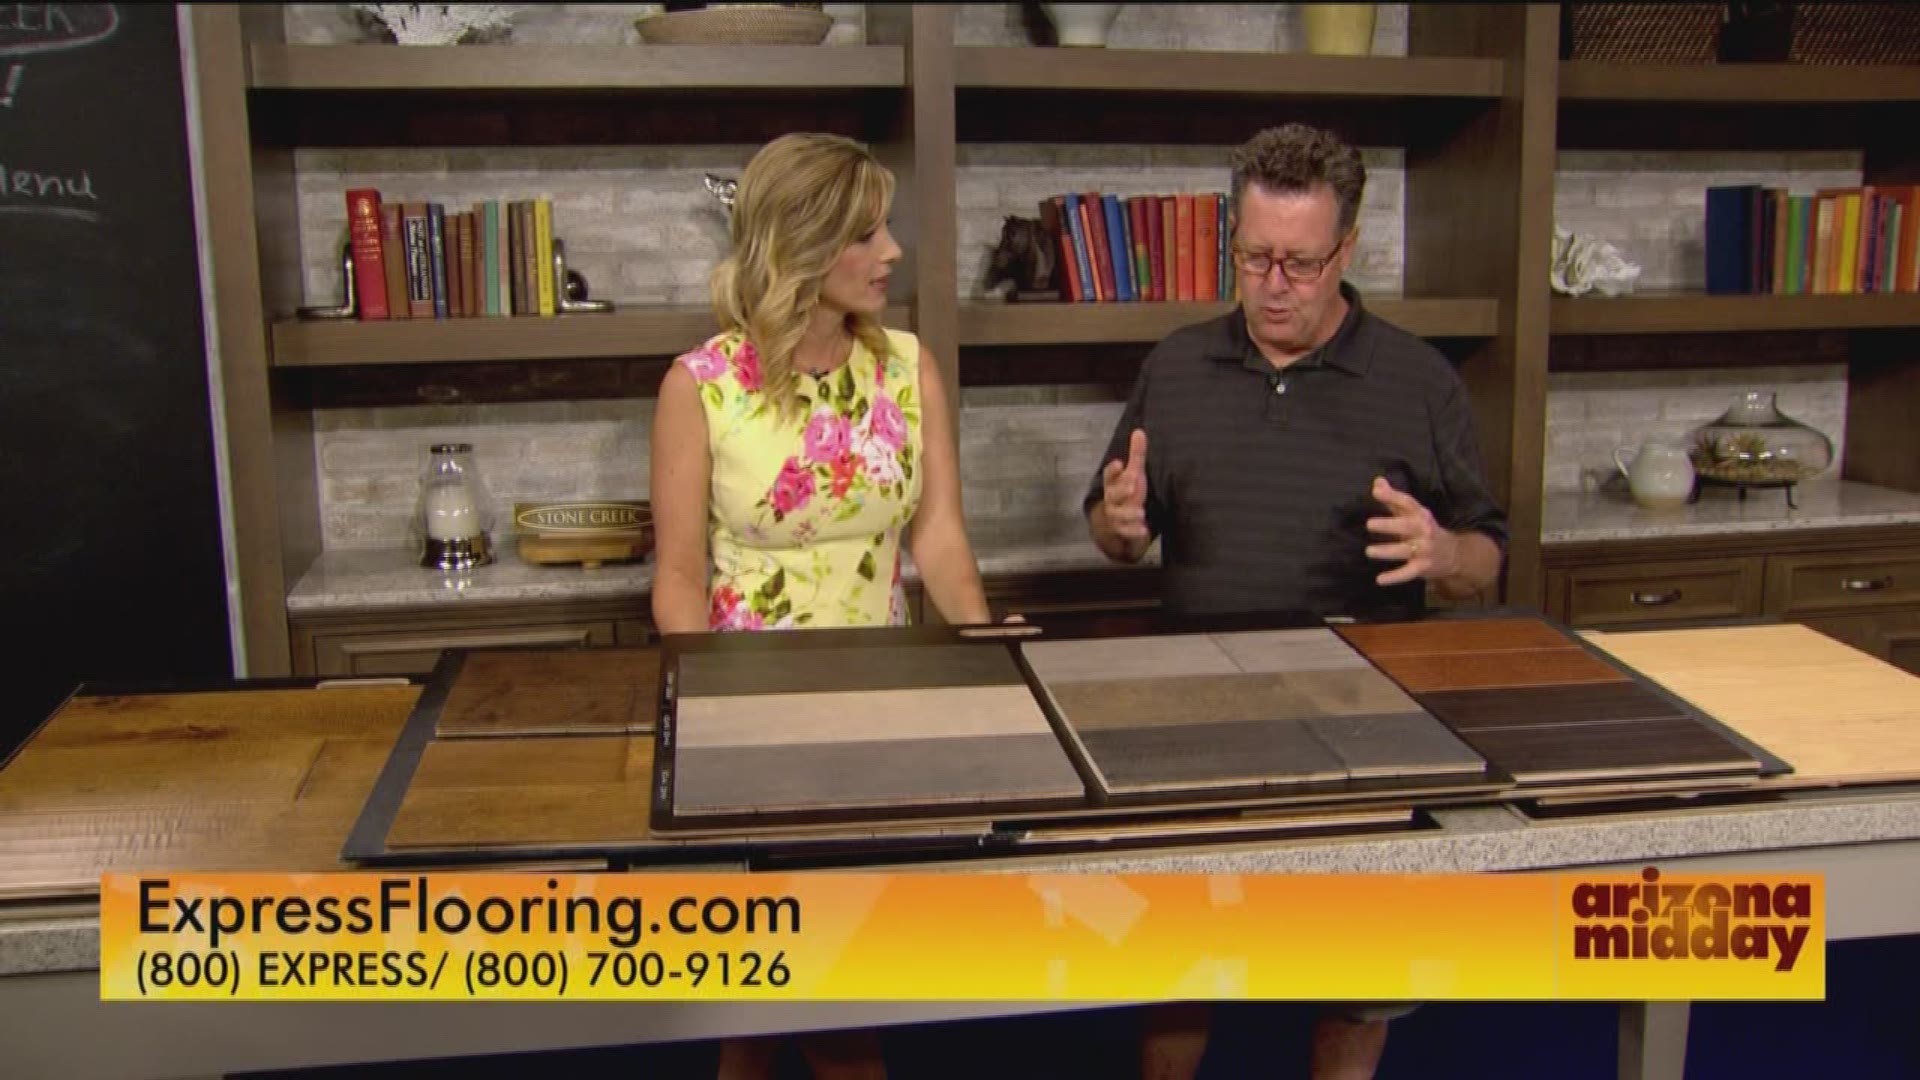 Are you looking to remodel your home? Express Flooring tells us more!